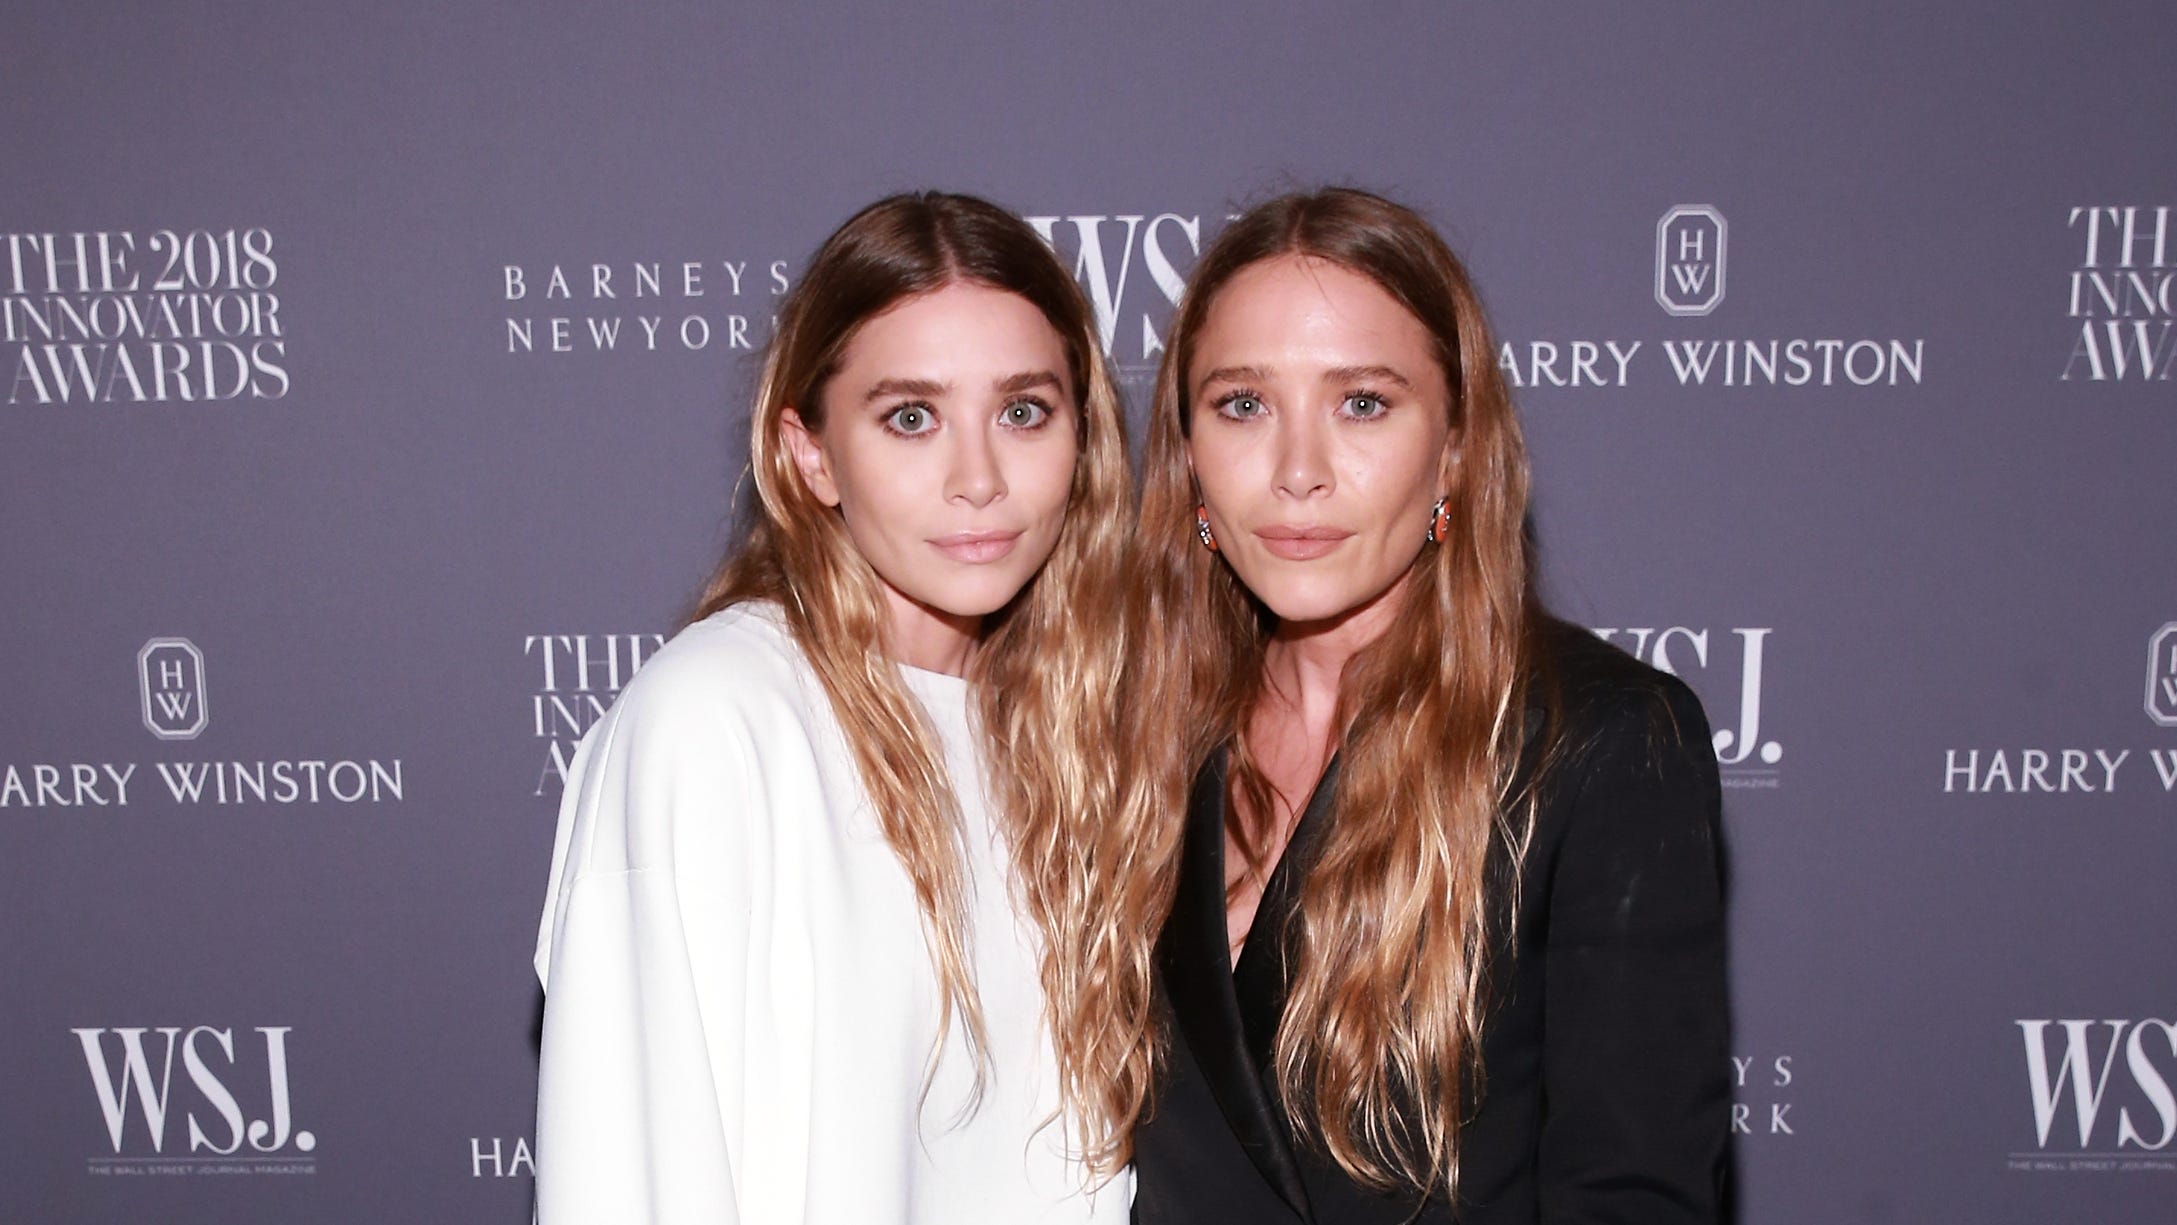 Mary-Kate and Ashley Olsen interview: 'Discreet' lives, The Row